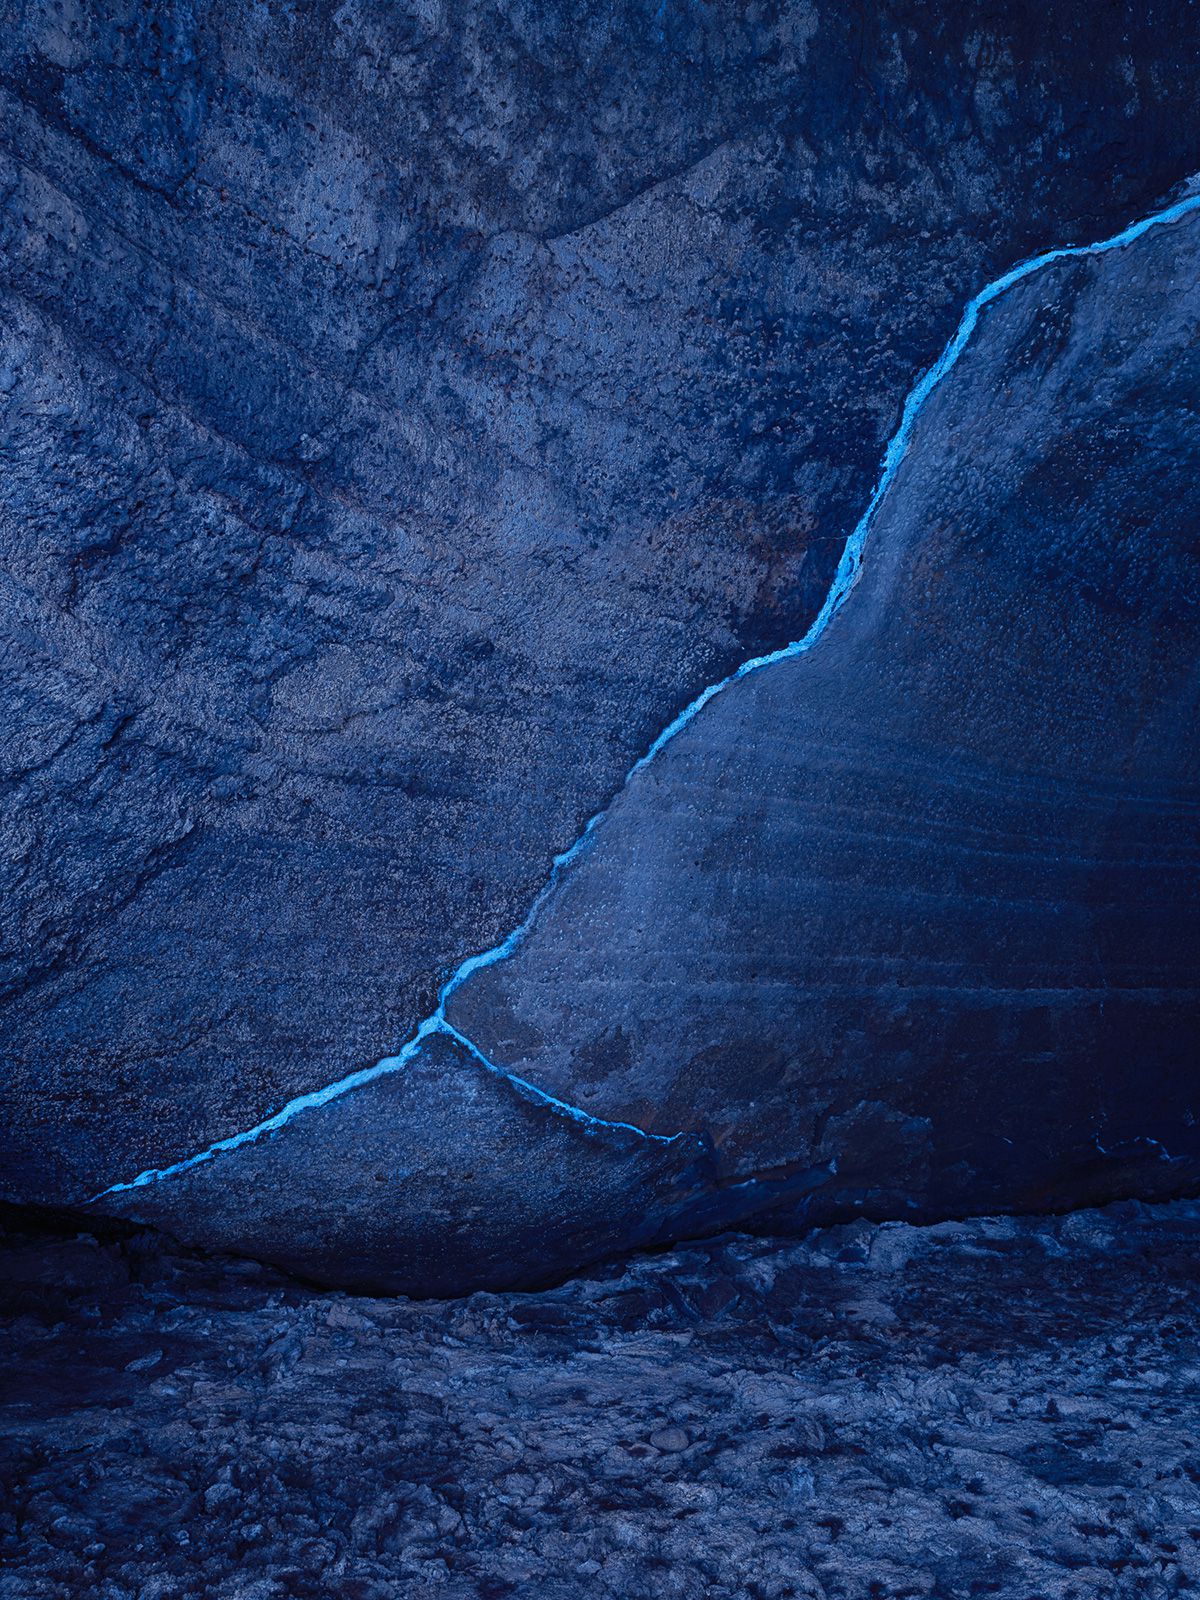 Spectral An Awe Inspiring Landscape Photography Series By Cody Cobb (10)